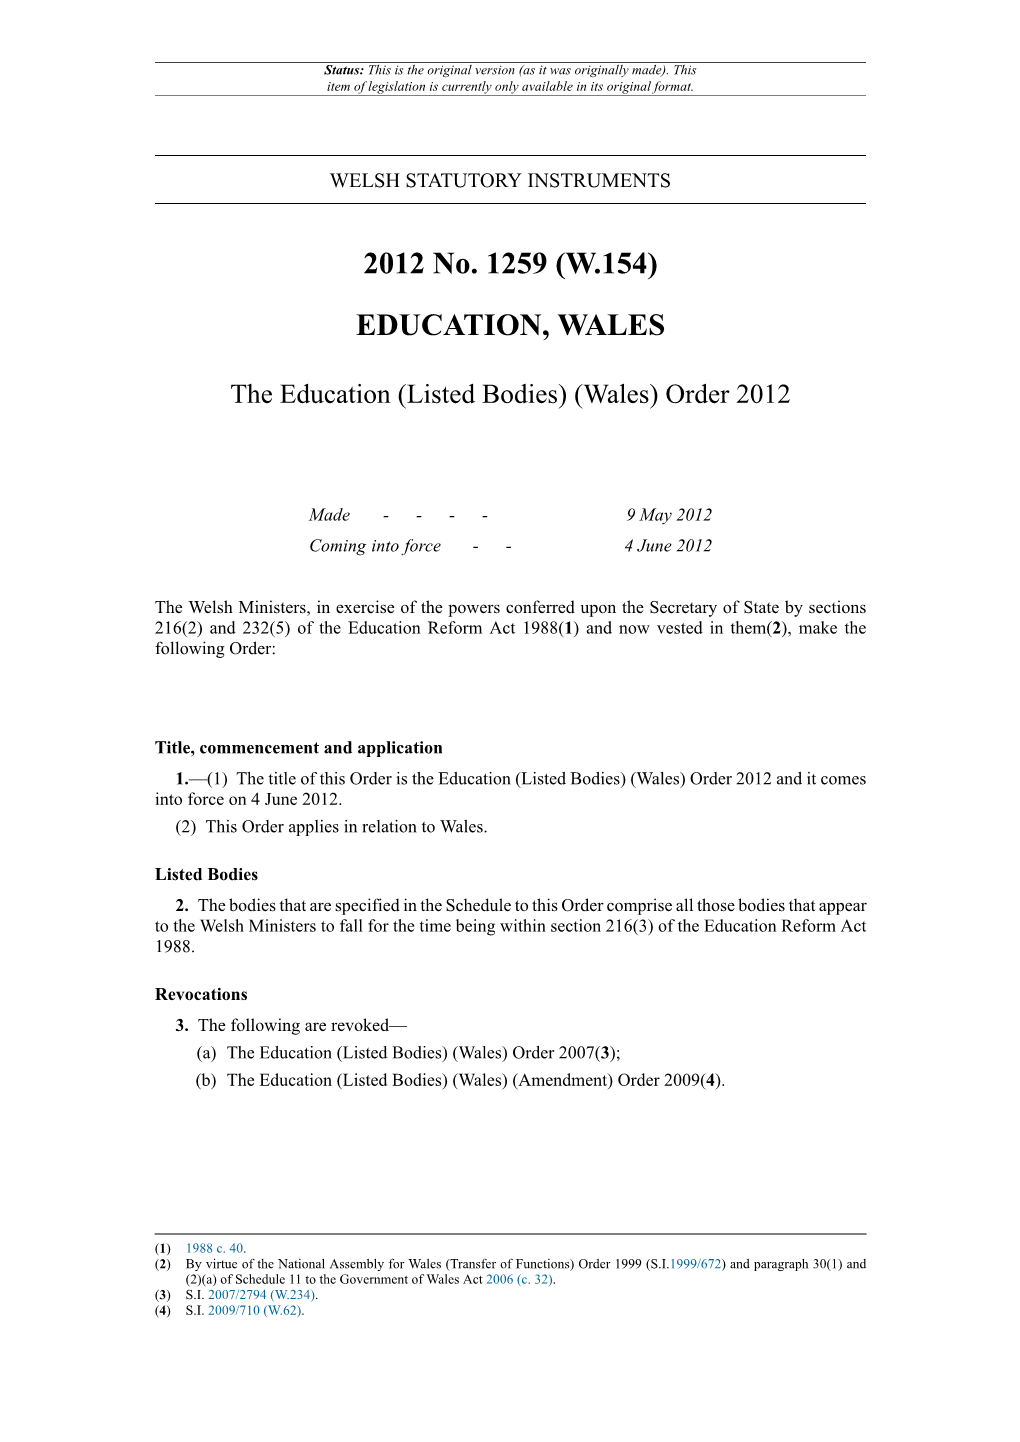 The Education (Listed Bodies) (Wales) Order 2012